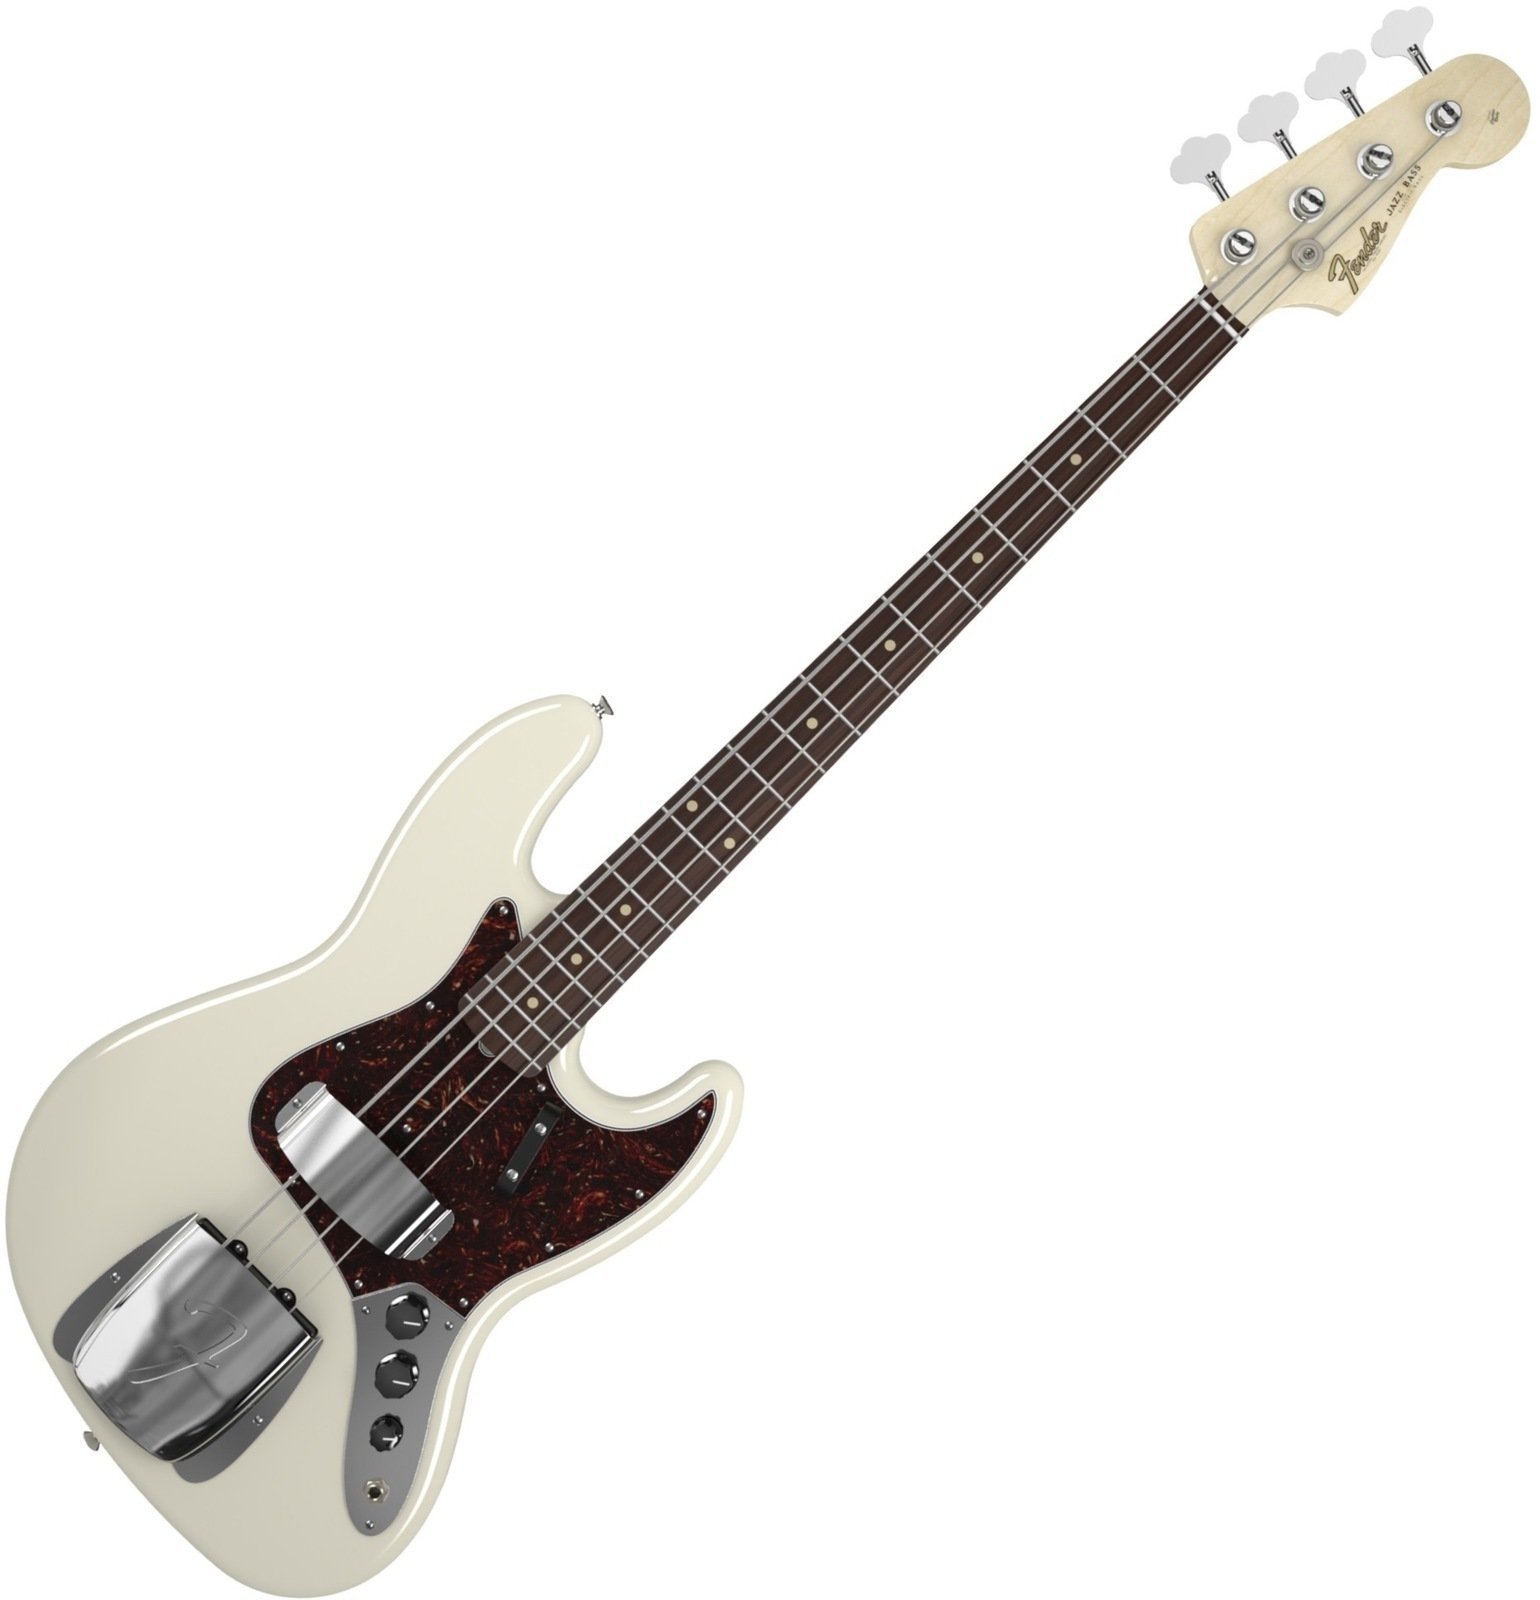 Basse électrique Fender American Vintage '64 Jazz Bass, Round-Laminated Rosewood Fingerboard, Olympic White